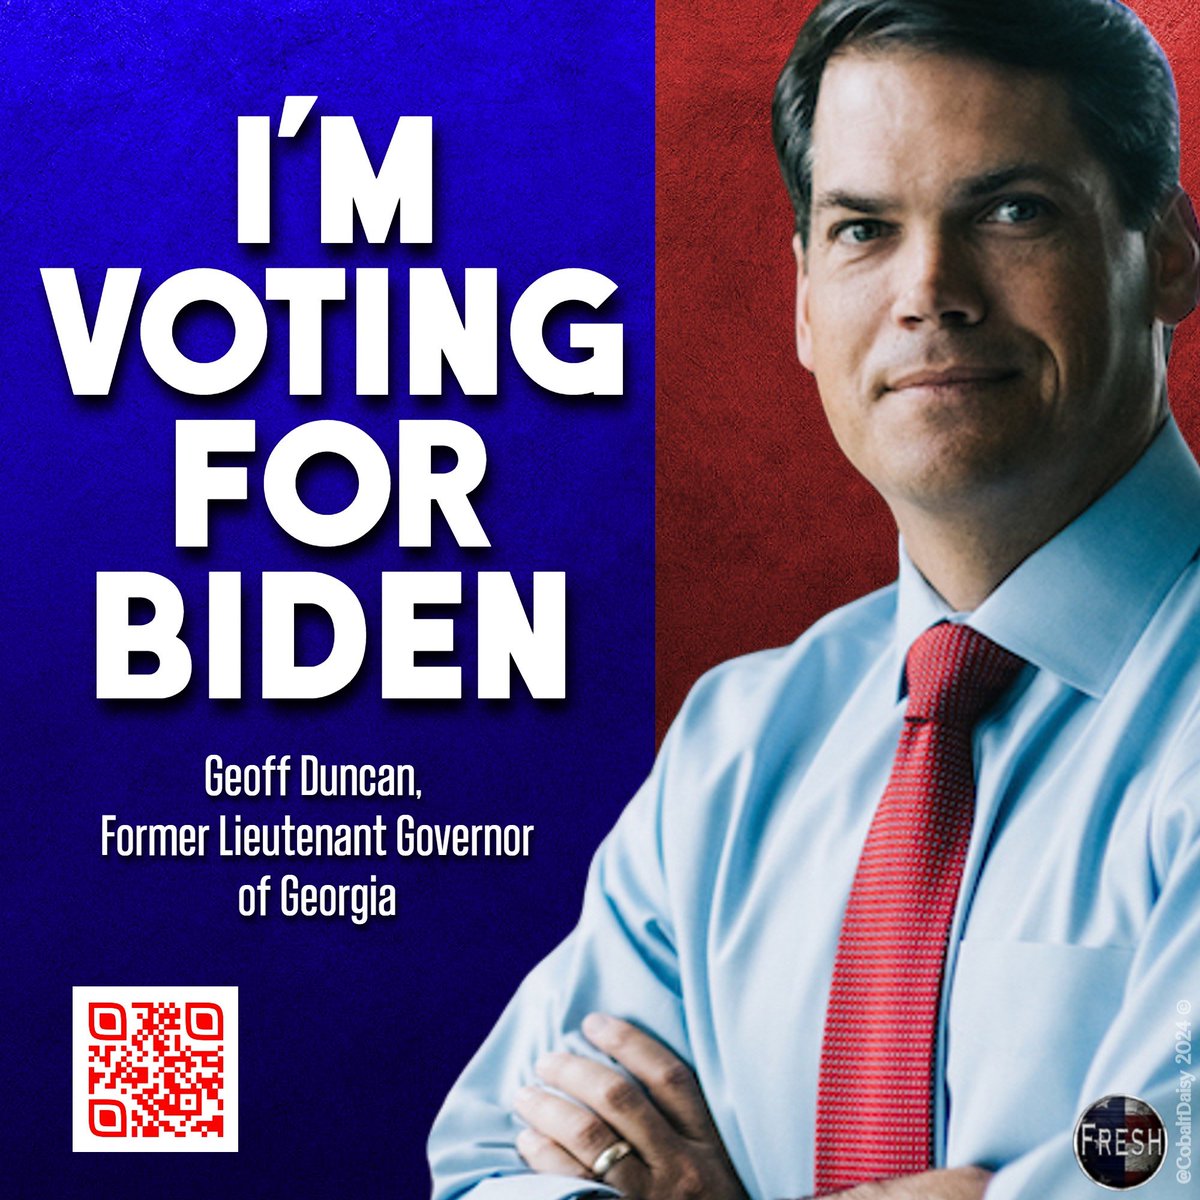 It is time for every person of good conscience to choose their country over their politics. Former GA Lieutenant Governor, Geoff Duncan refuses to vote for a criminal defendant who tried to overthrow the government. 

He will cast his vote for Joe Biden!
#FreshUnity
#4MoreYears